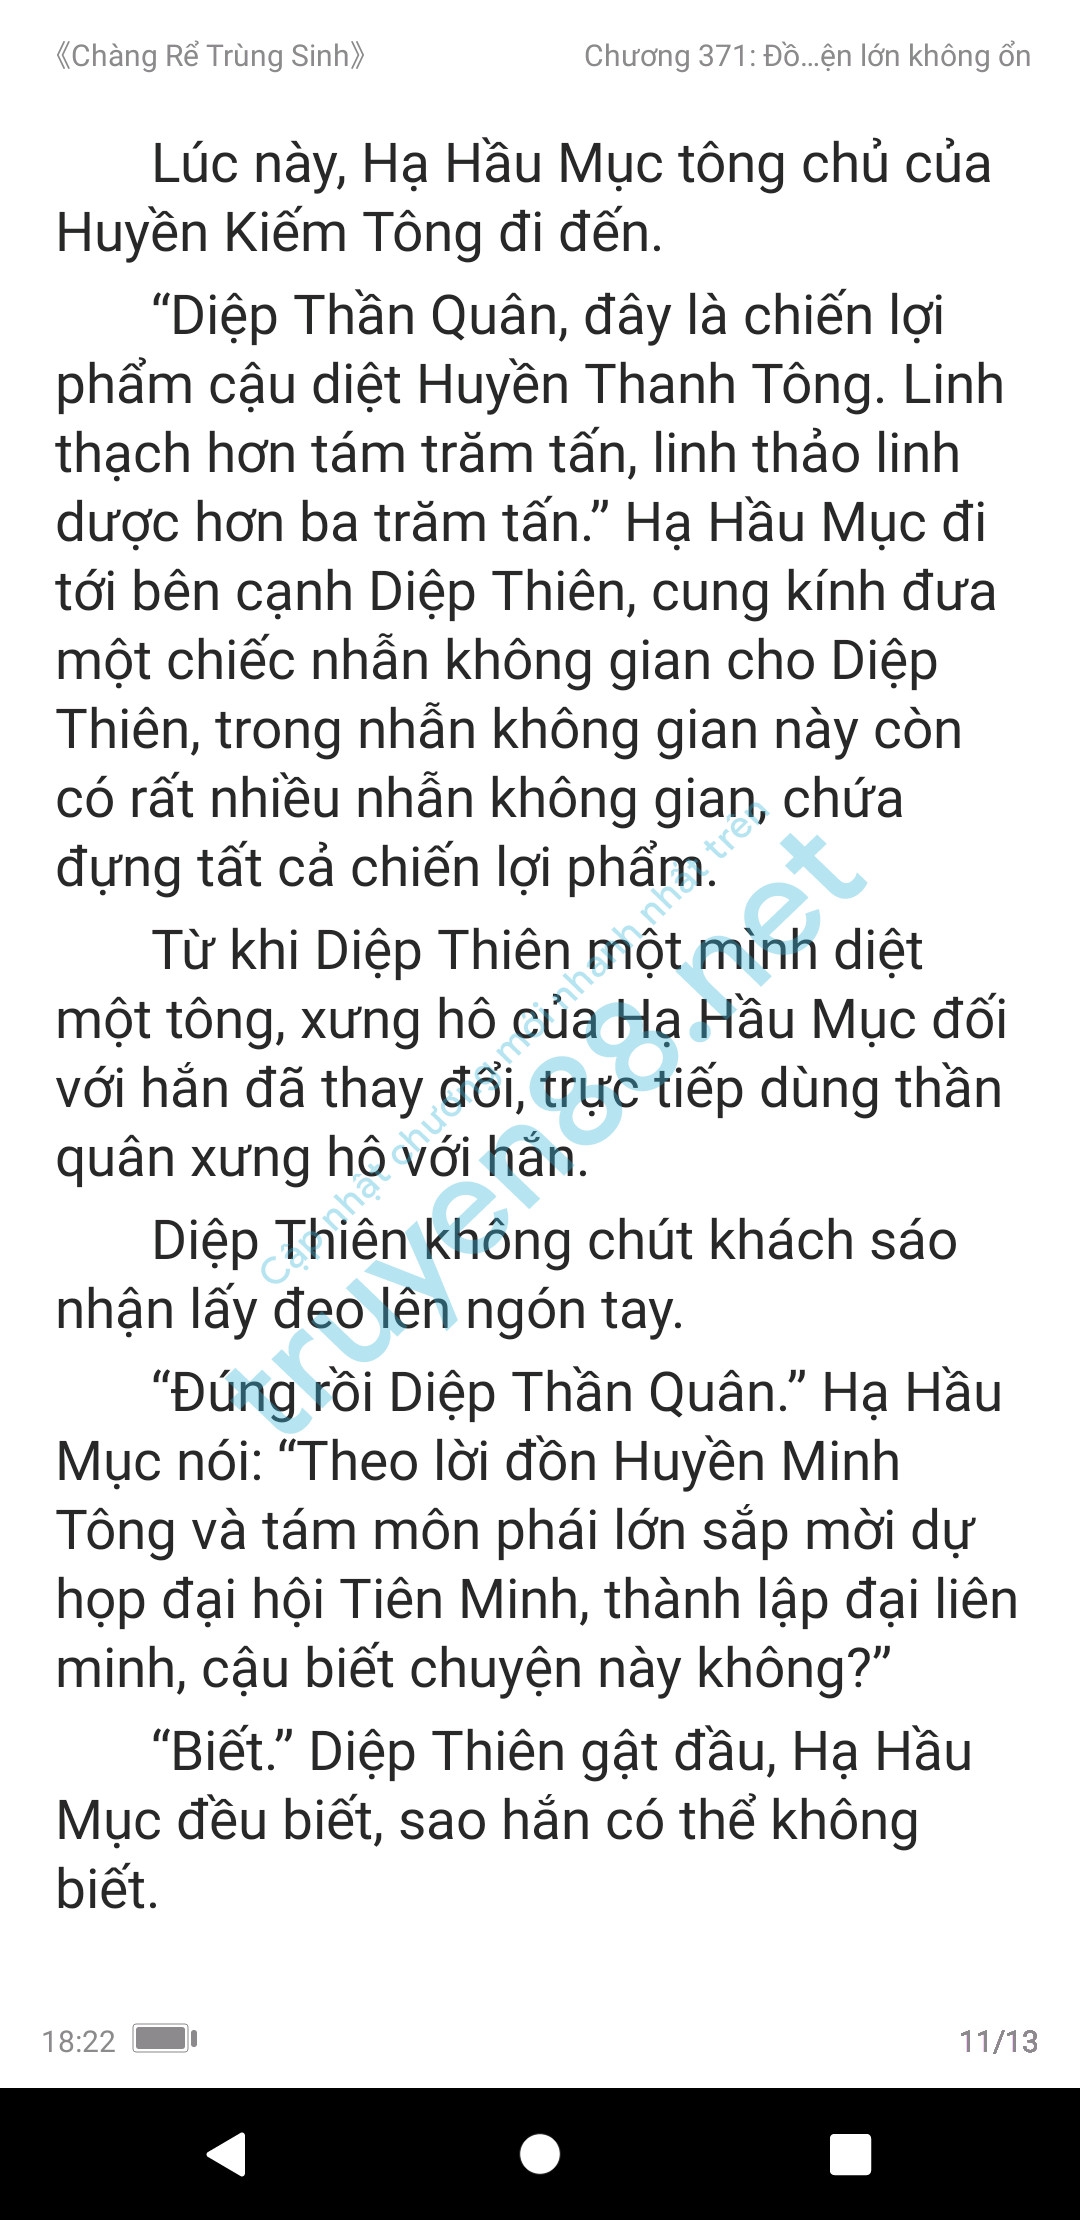 chang-re-trung-sinh-371-0